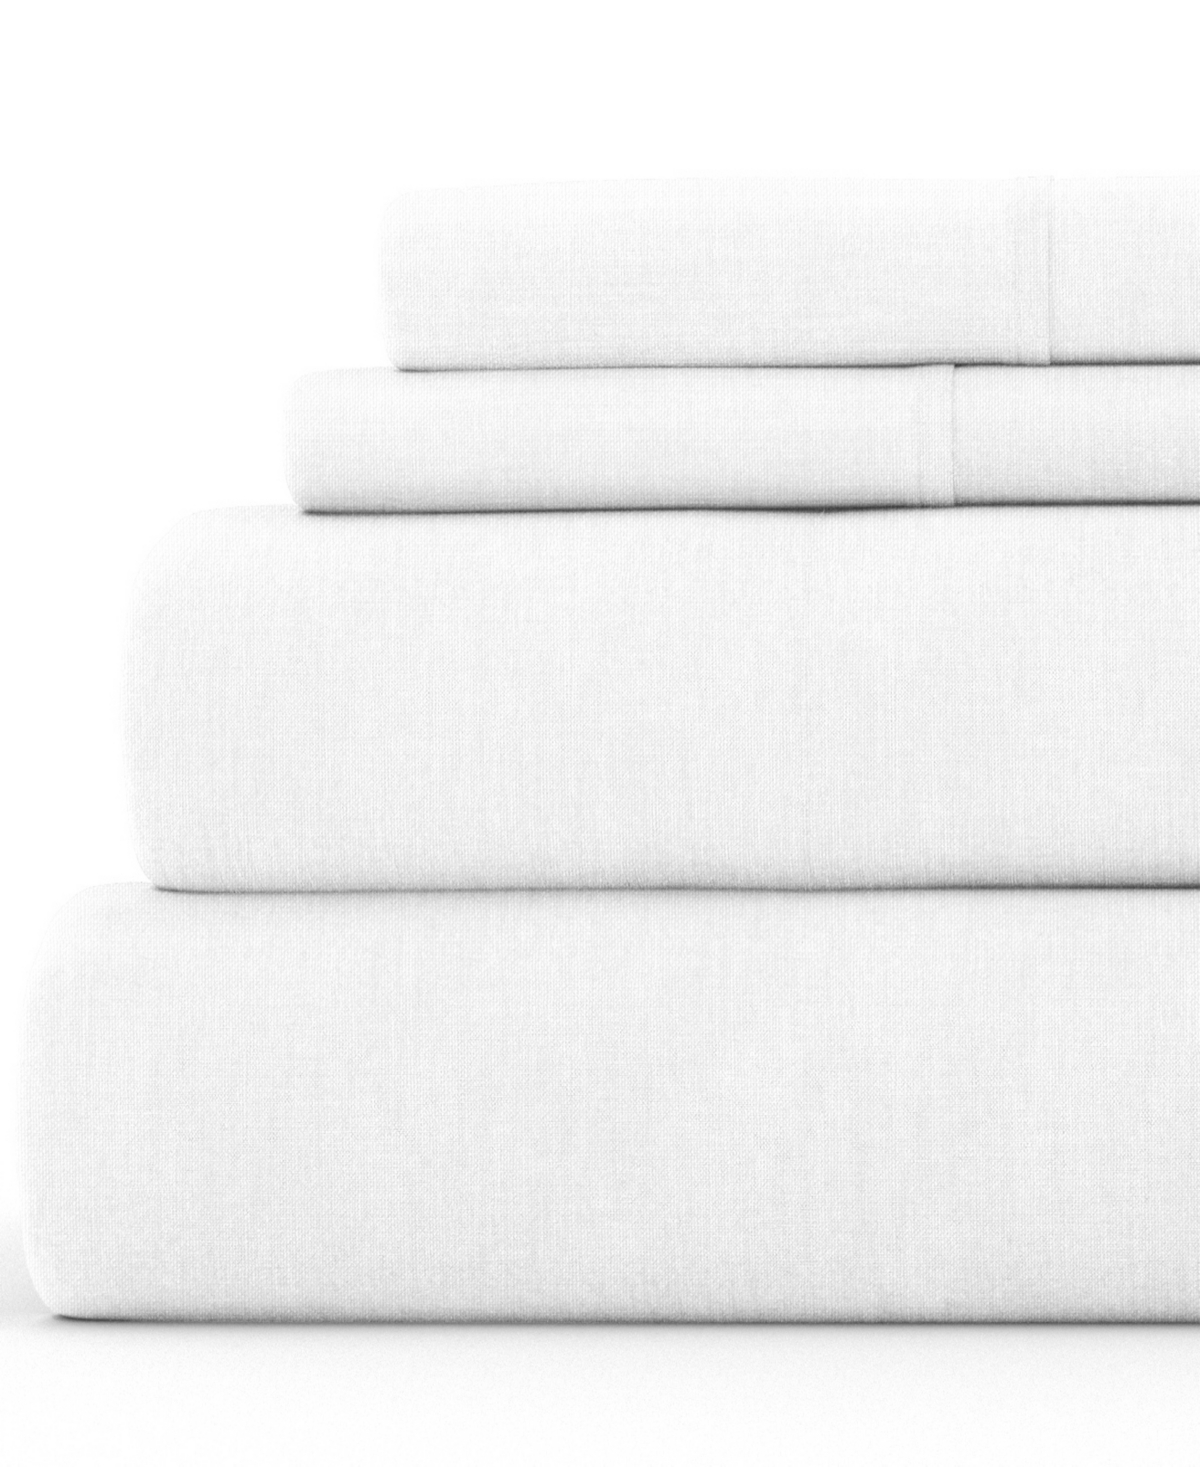 Ienjoy Home Linen Rayon From Bamboo Blend Deep Pocket 300 Thread Count 3 Piece Sheet Set, Twin In White